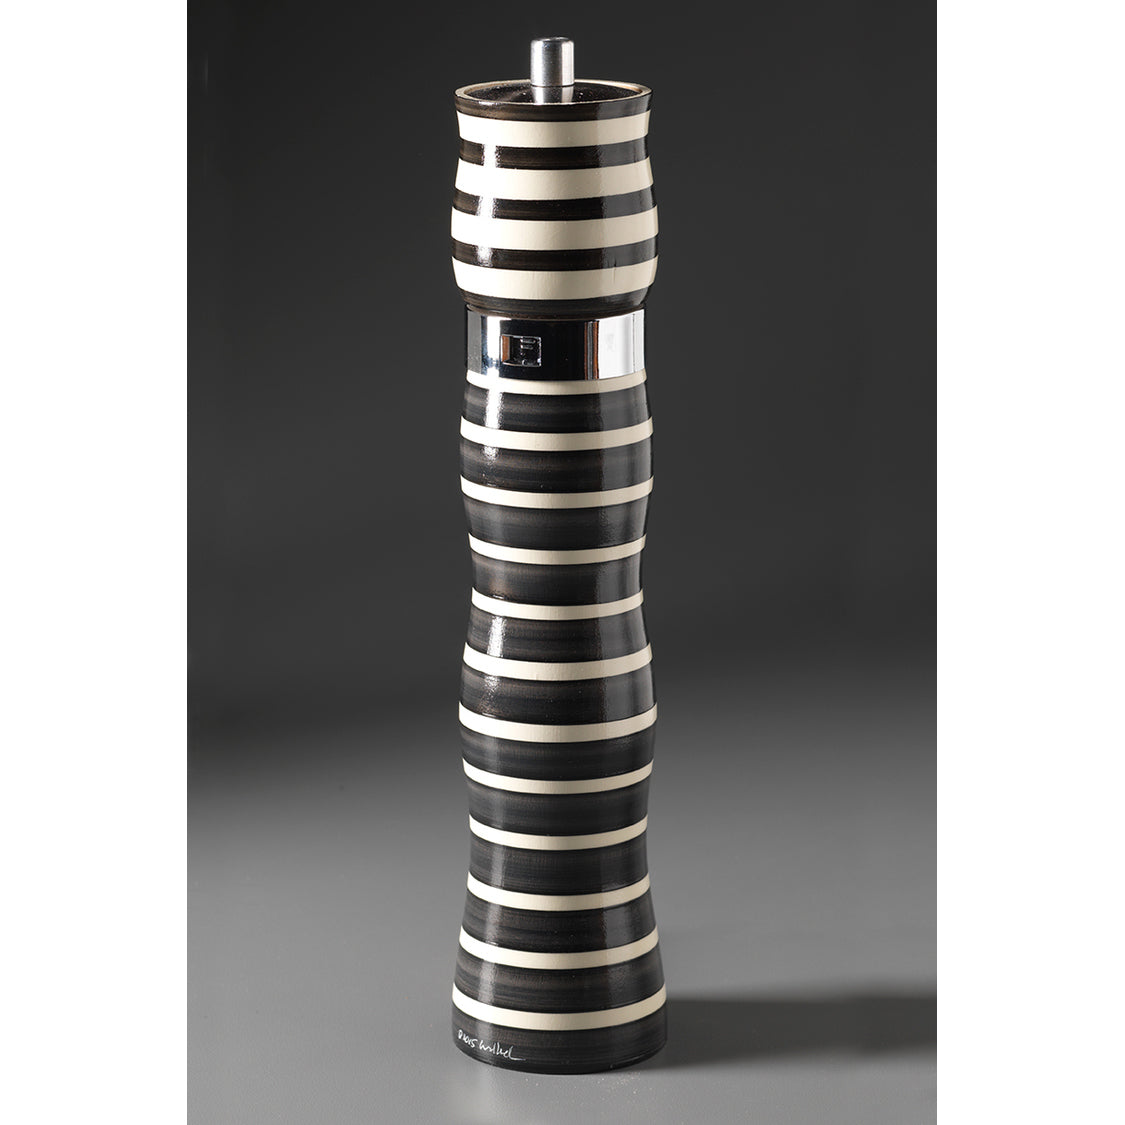 Black and White Wooden Salt Shaker and Pepper Mill Combo C-8 - Hand Painted Sculptural Salt Shakers and Pepper Mills-Grinders by Robert Wilhelm of Raw Designs